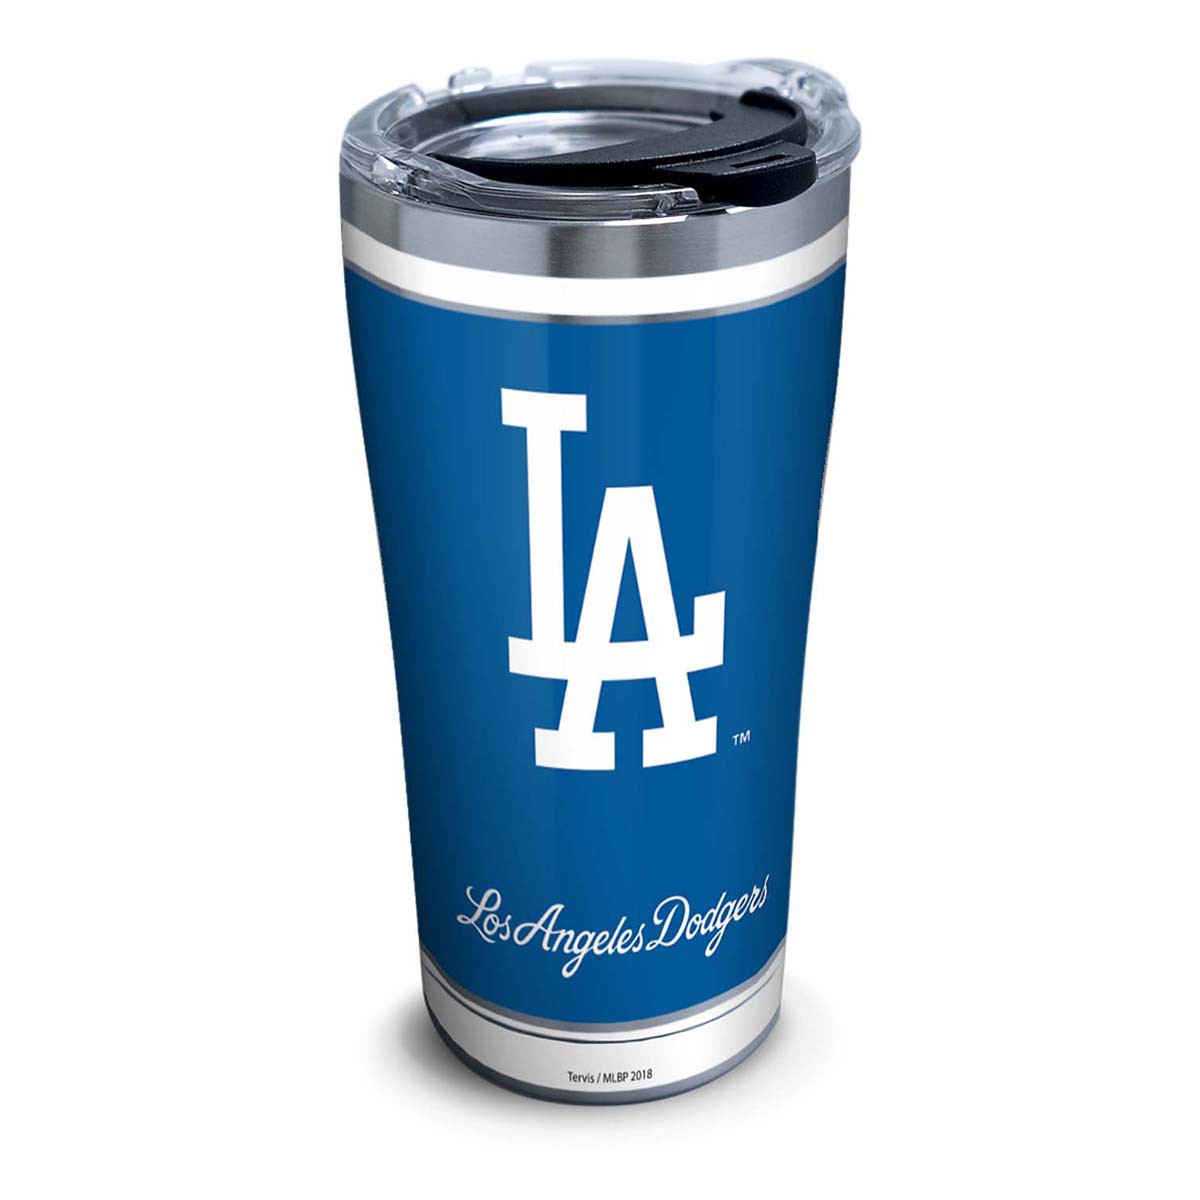 Los Angeles Dodgers Home Run 20 oz. Stainless Steel Tumbler